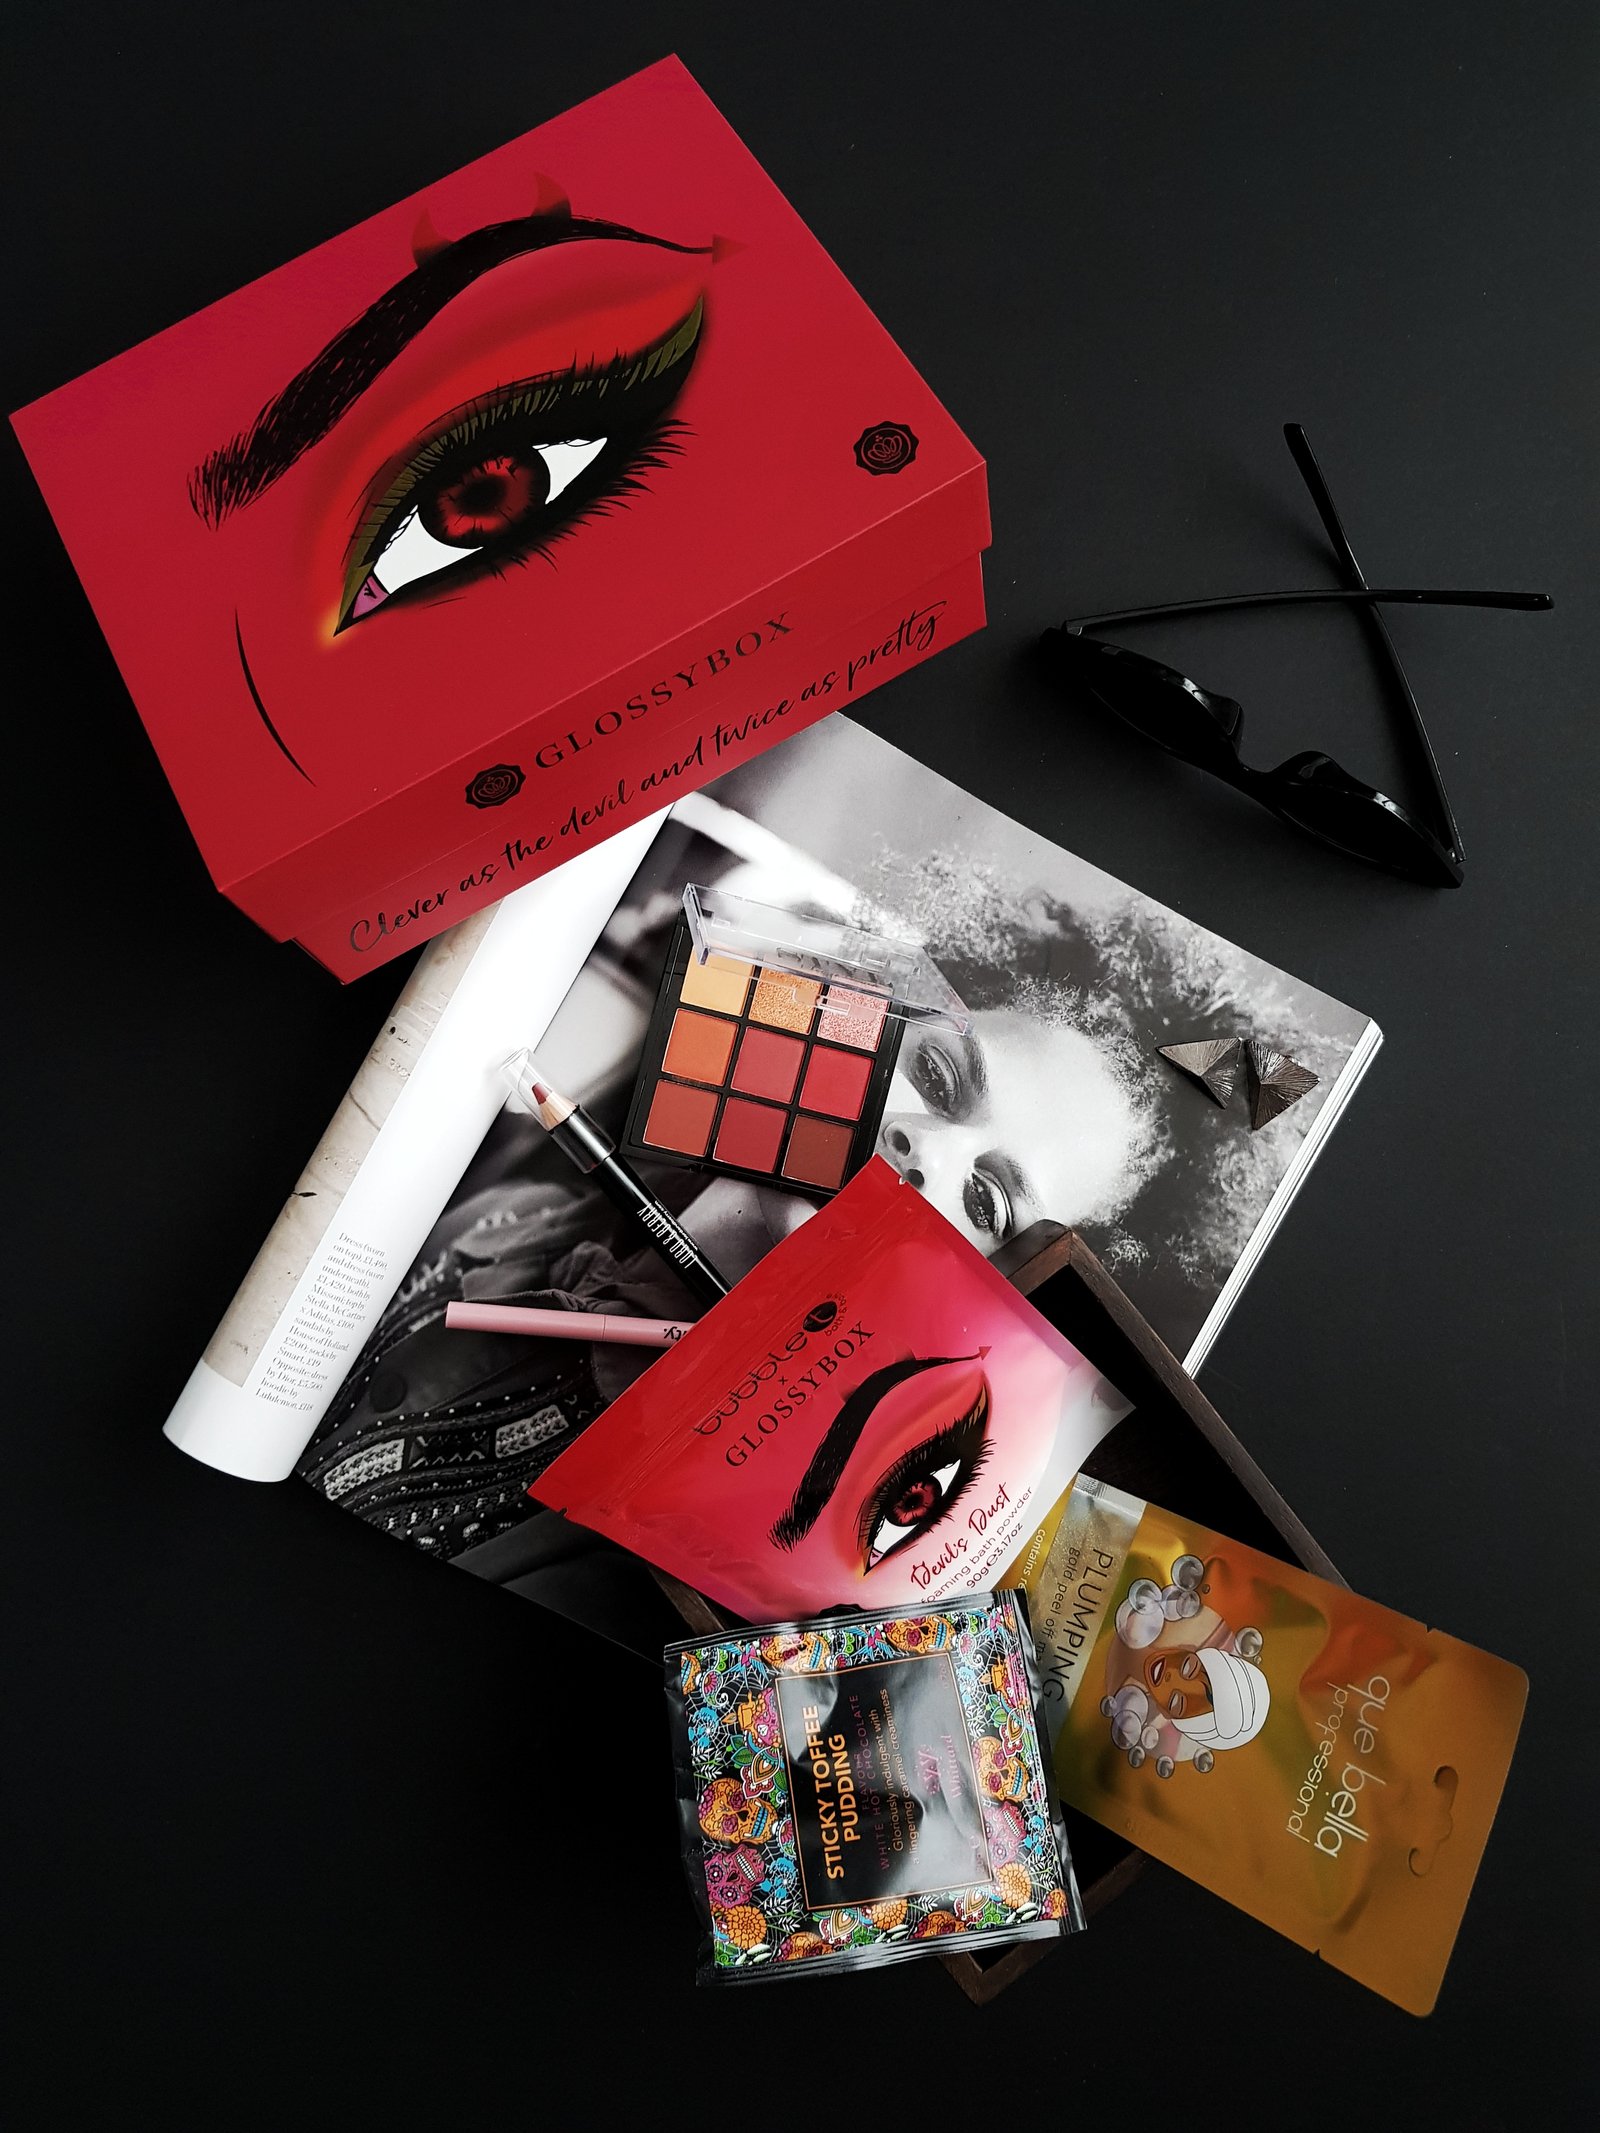 The Devil Edit from GlossyBox